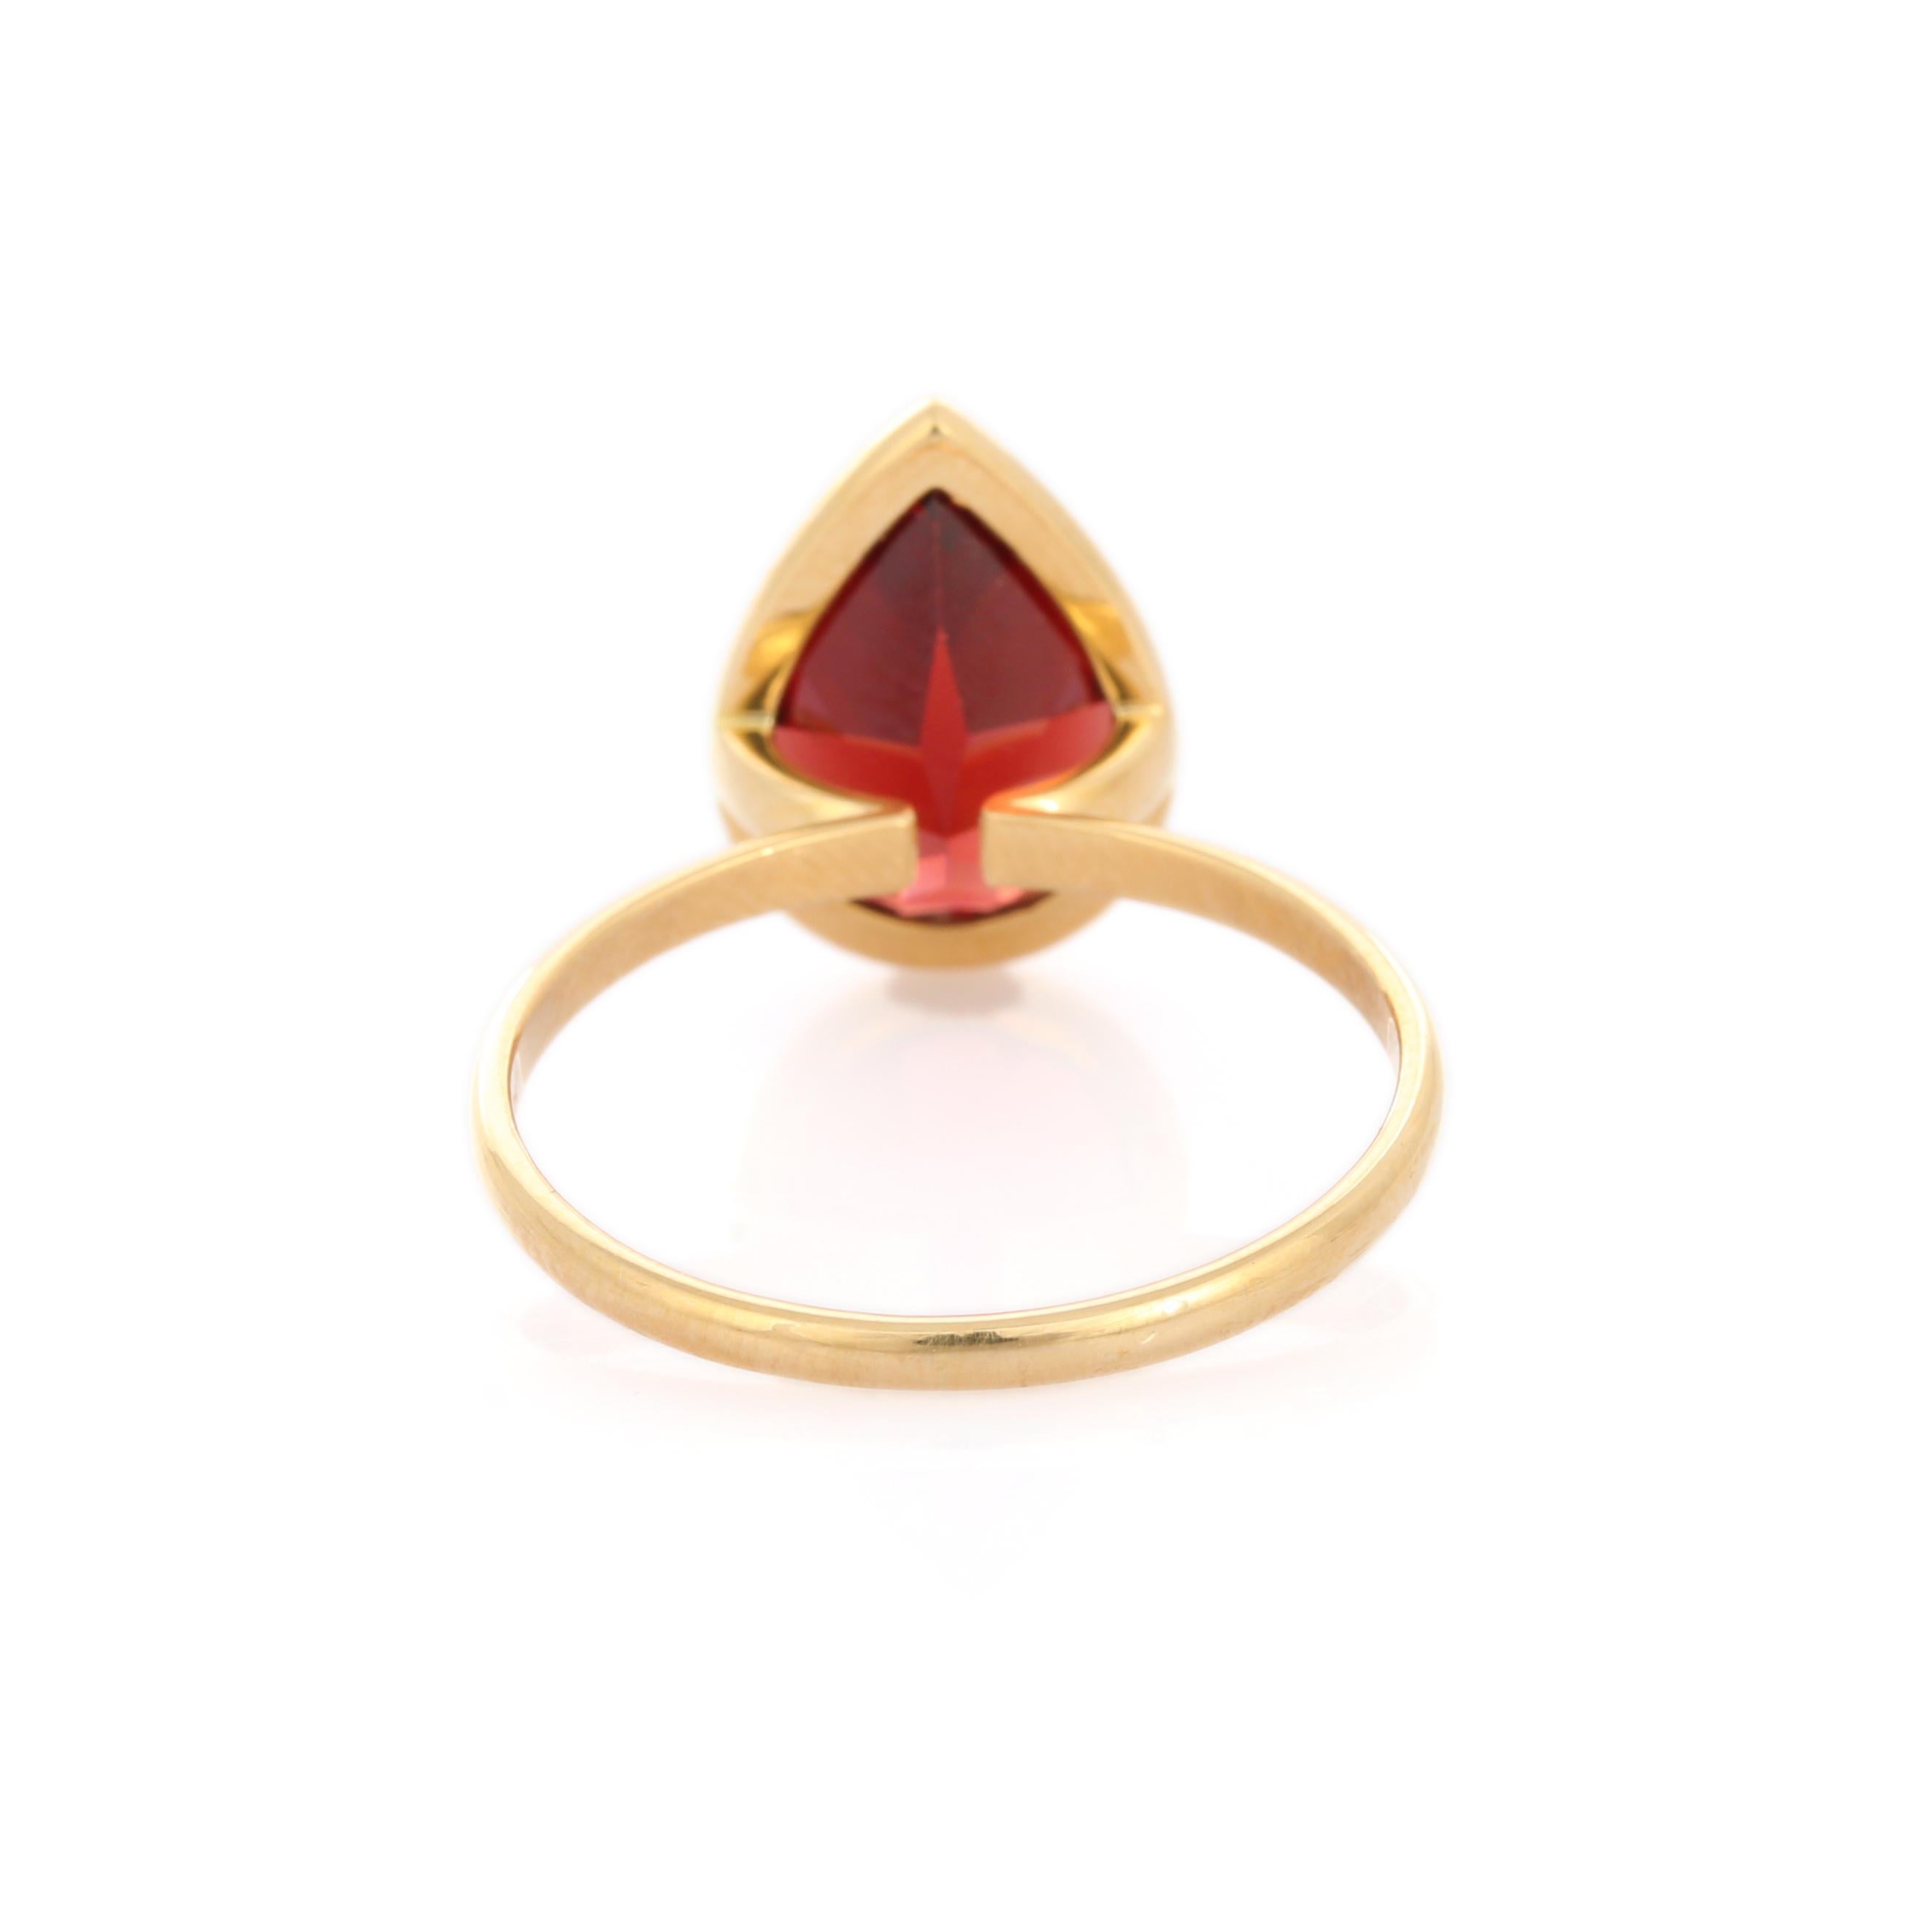 For Sale:  3.5 Carat Pear Cut Garnet Cocktail Ring in 18K Yellow Gold 3